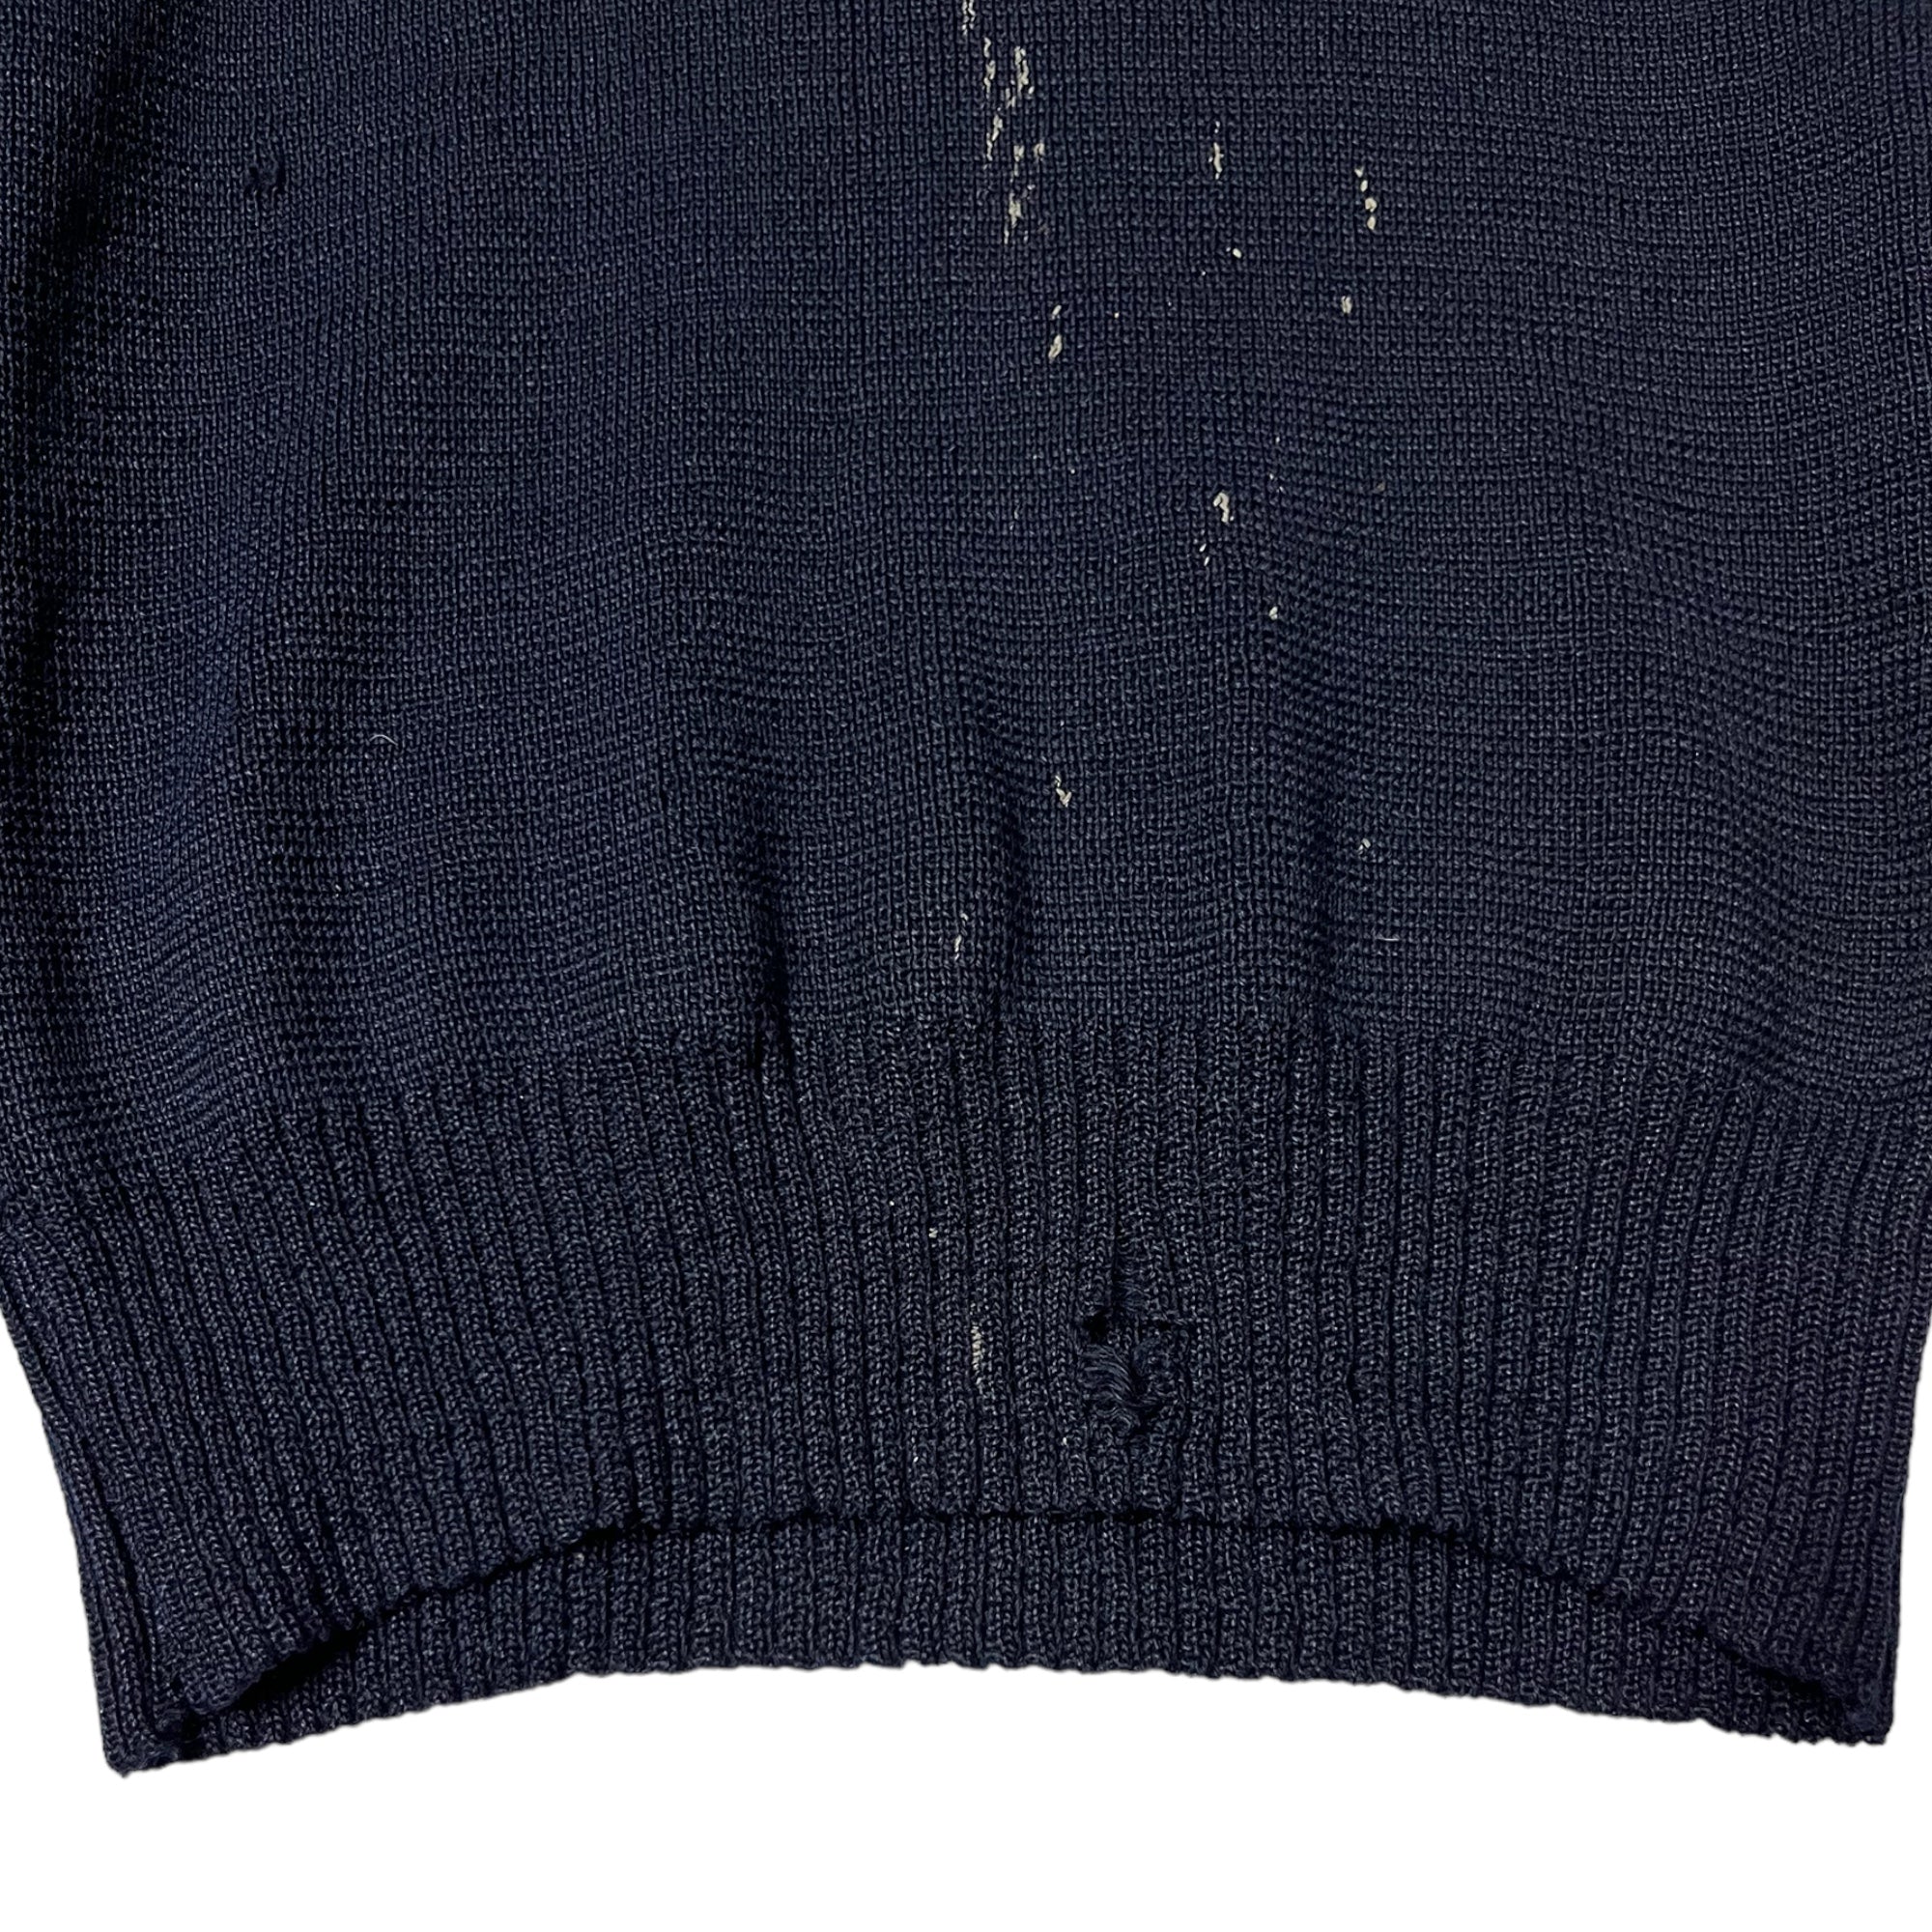 1930s French ‘Patron’ Stained Knit Sweater - Navy Blue - XS/S